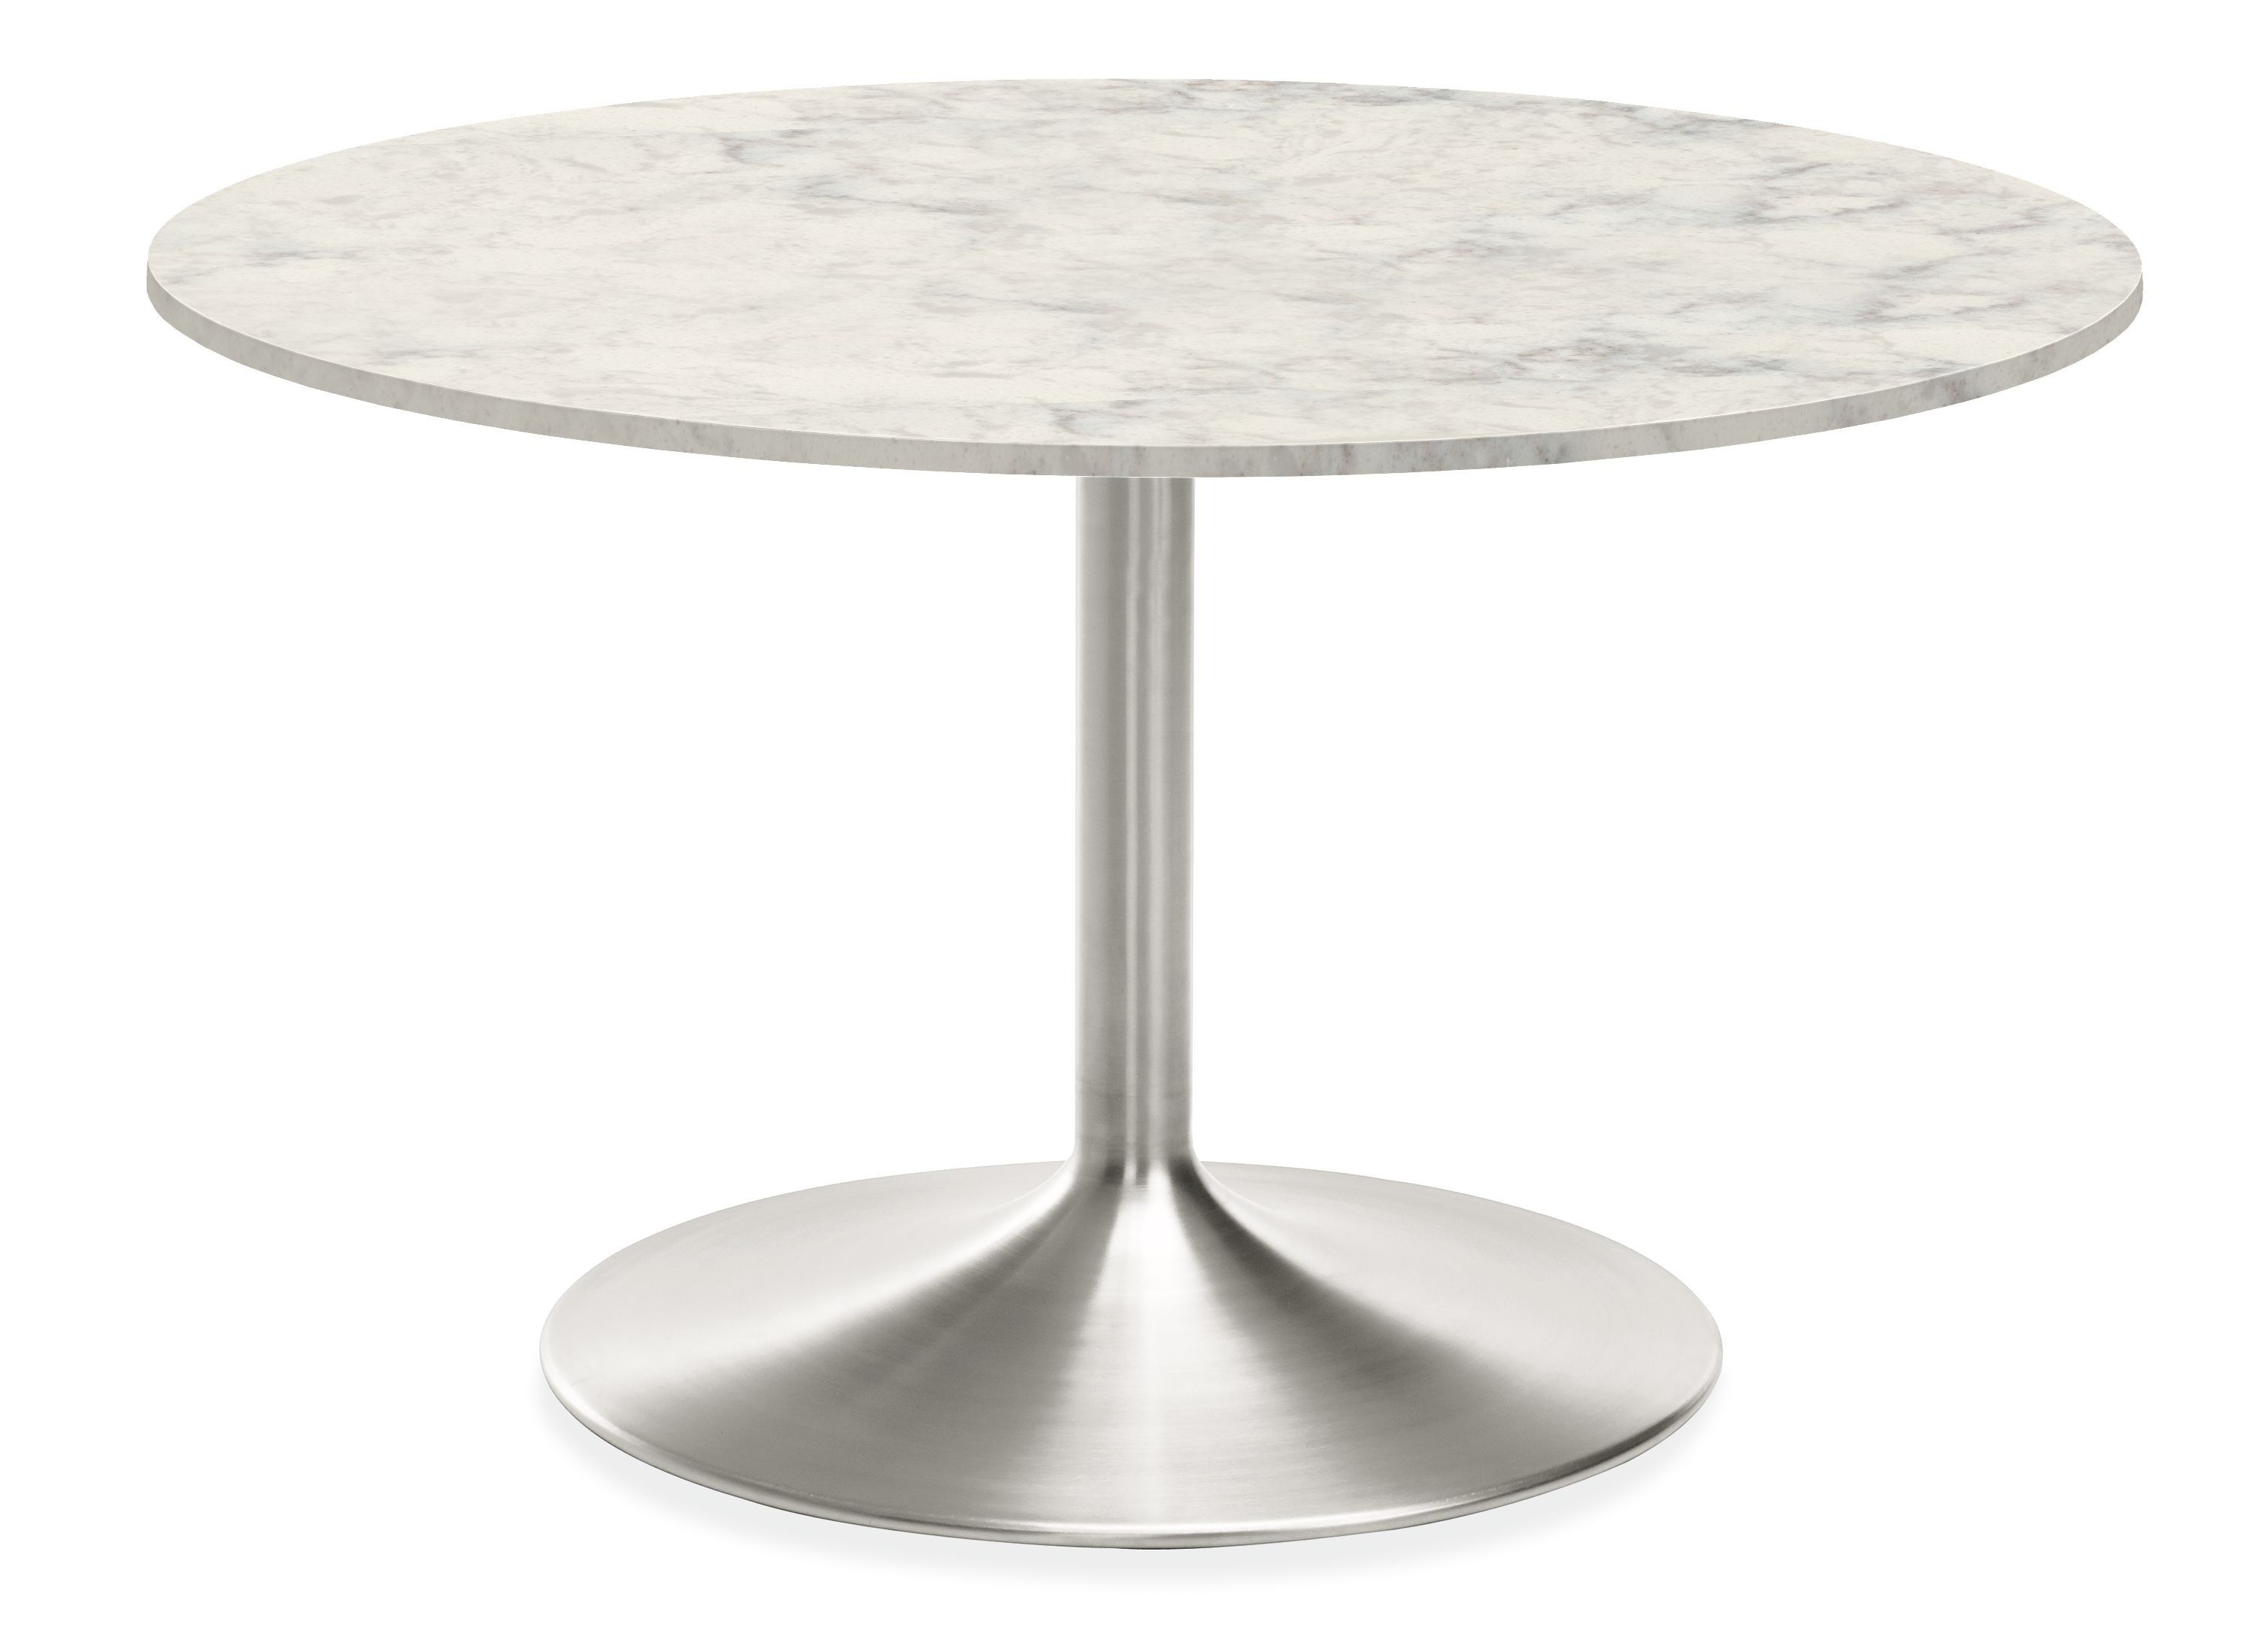 Aria Round Tables Modern Dining Room, Furniture Village Round Glass Coffee Table